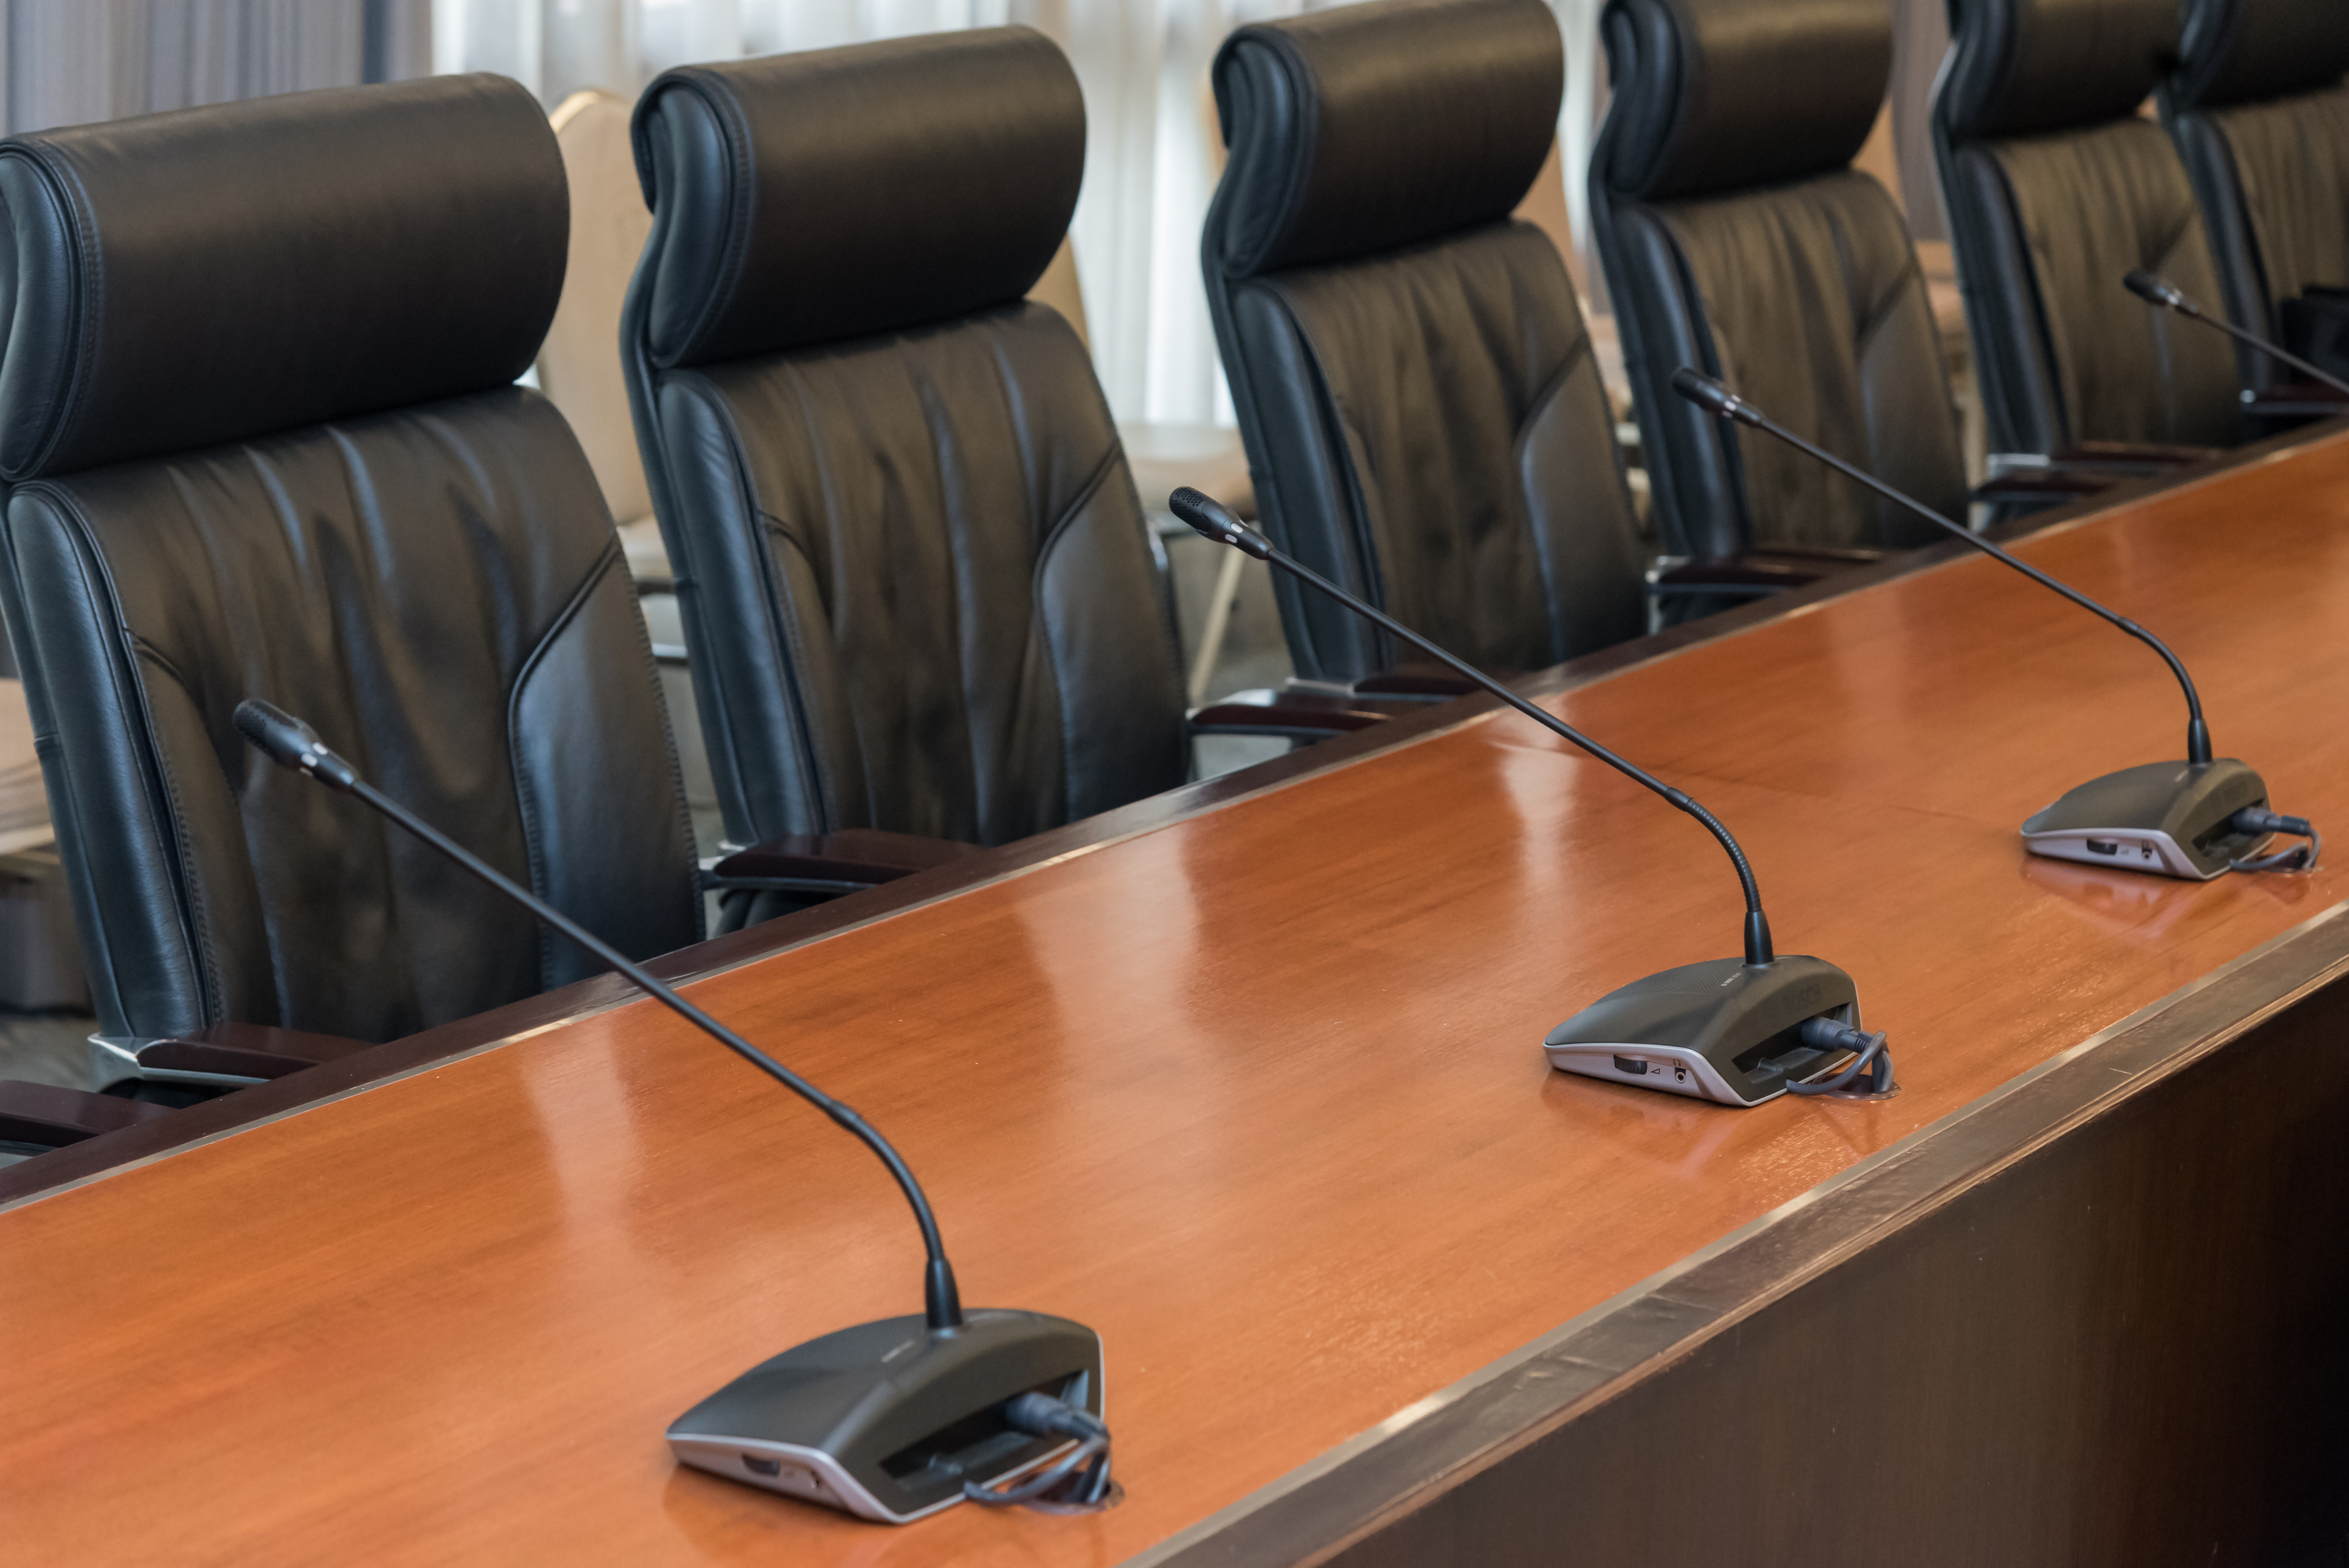 Empty chairs at a board room table with microphones